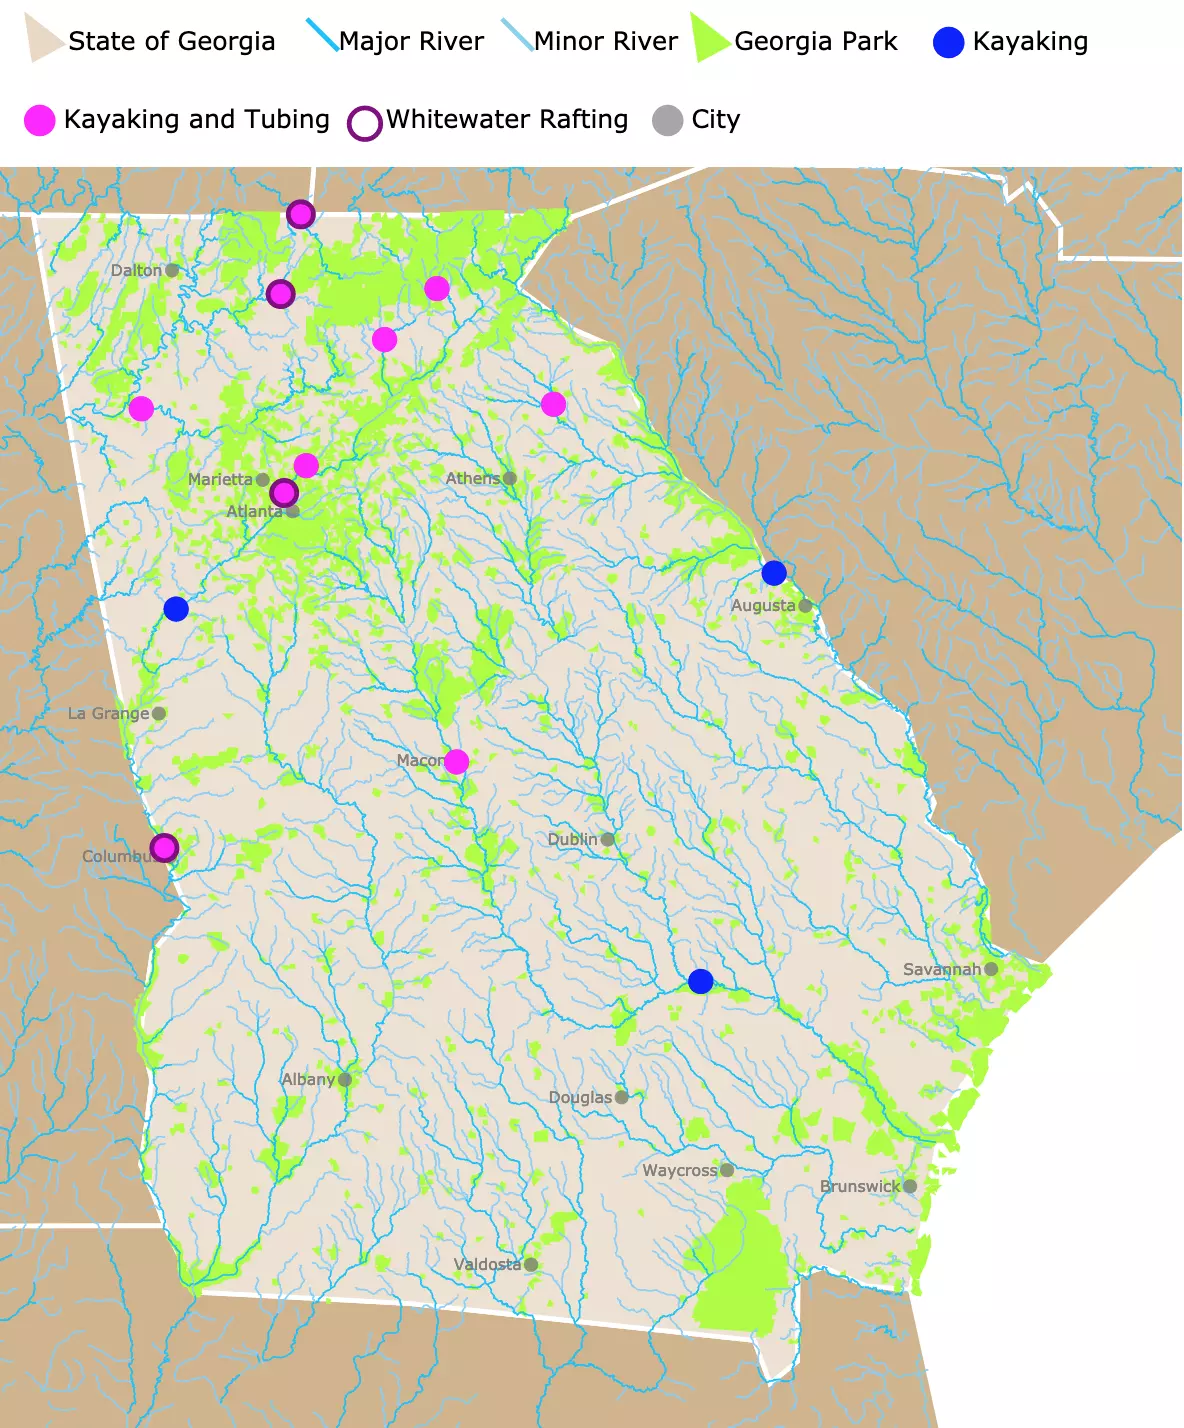 Interactive map of whitewater rafting, kayaking, and natural Lazy rivers for tubing in Georgia.